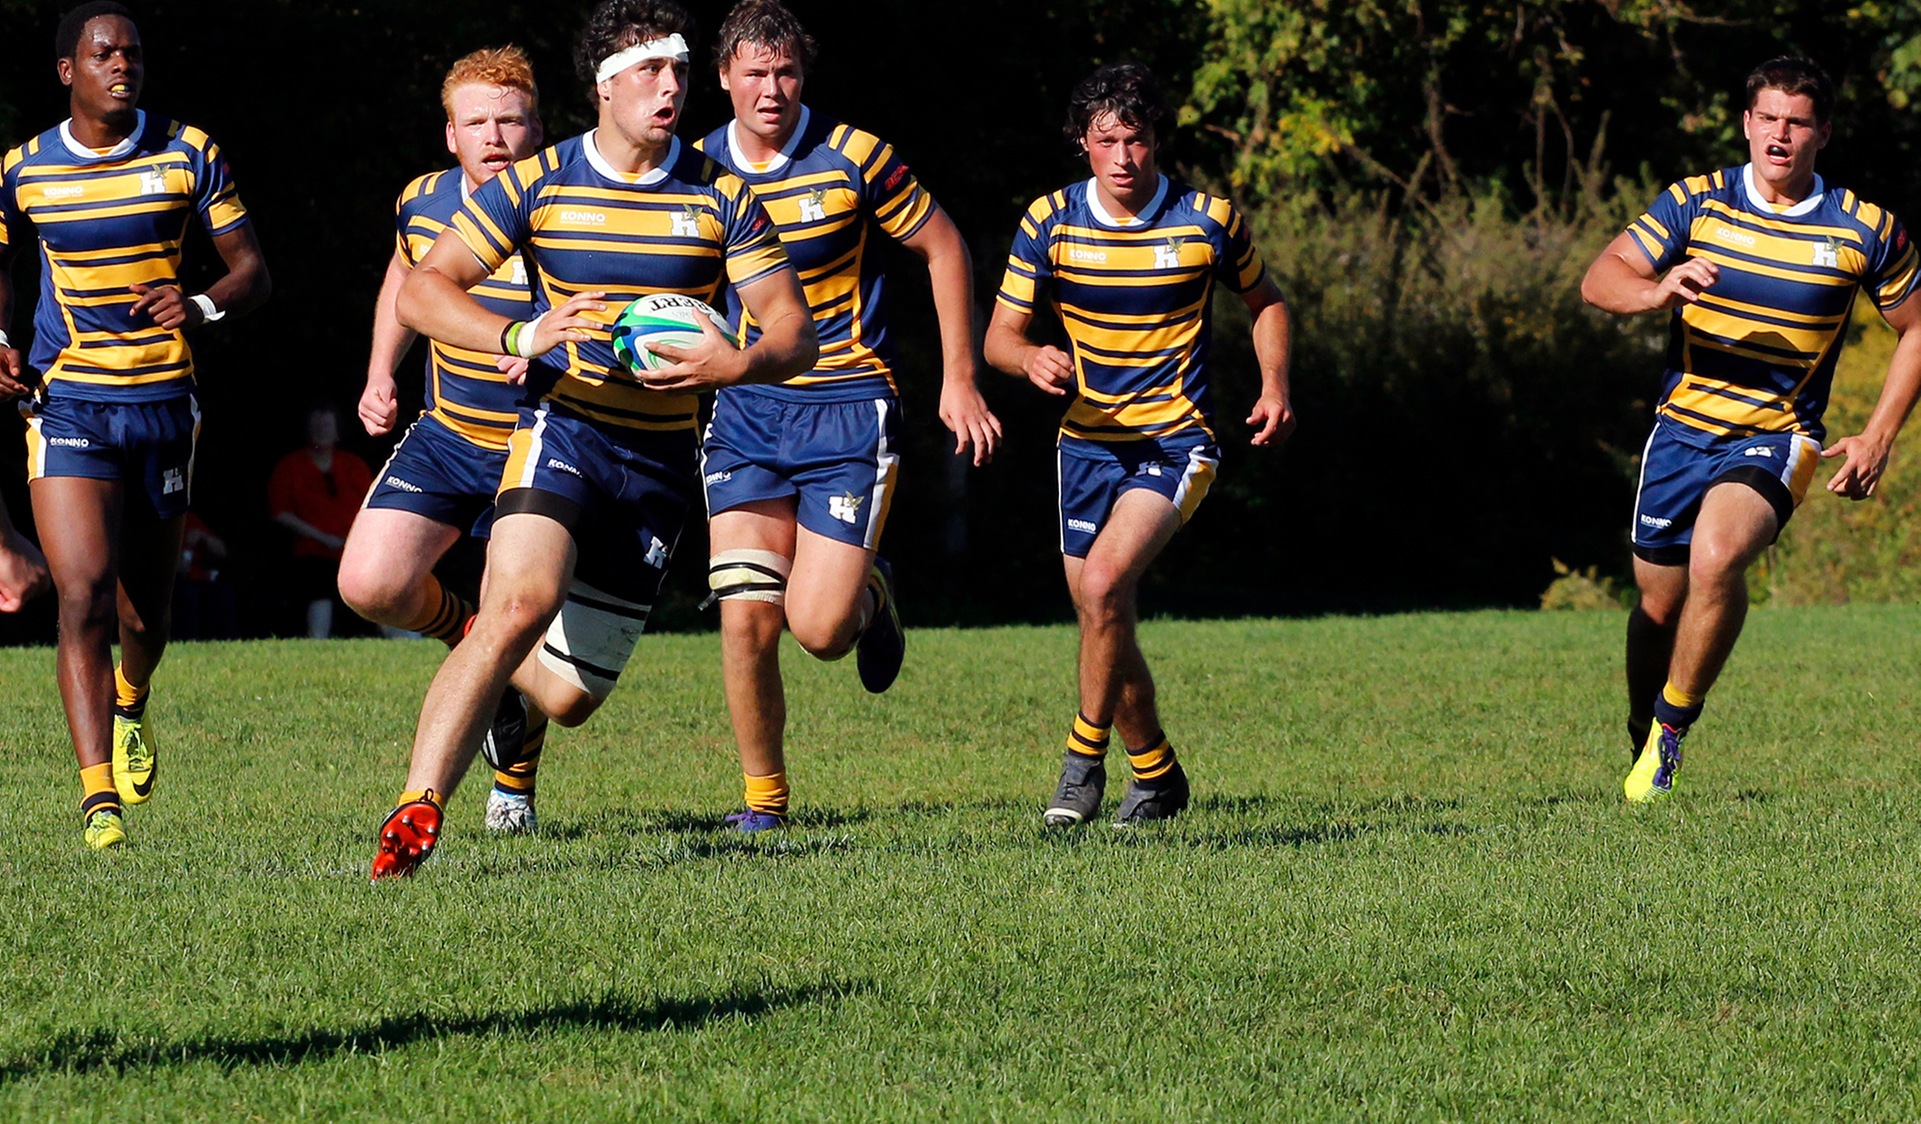 Iconic Hawks Men's Rugby Program Returns To Humber For 2019 Season